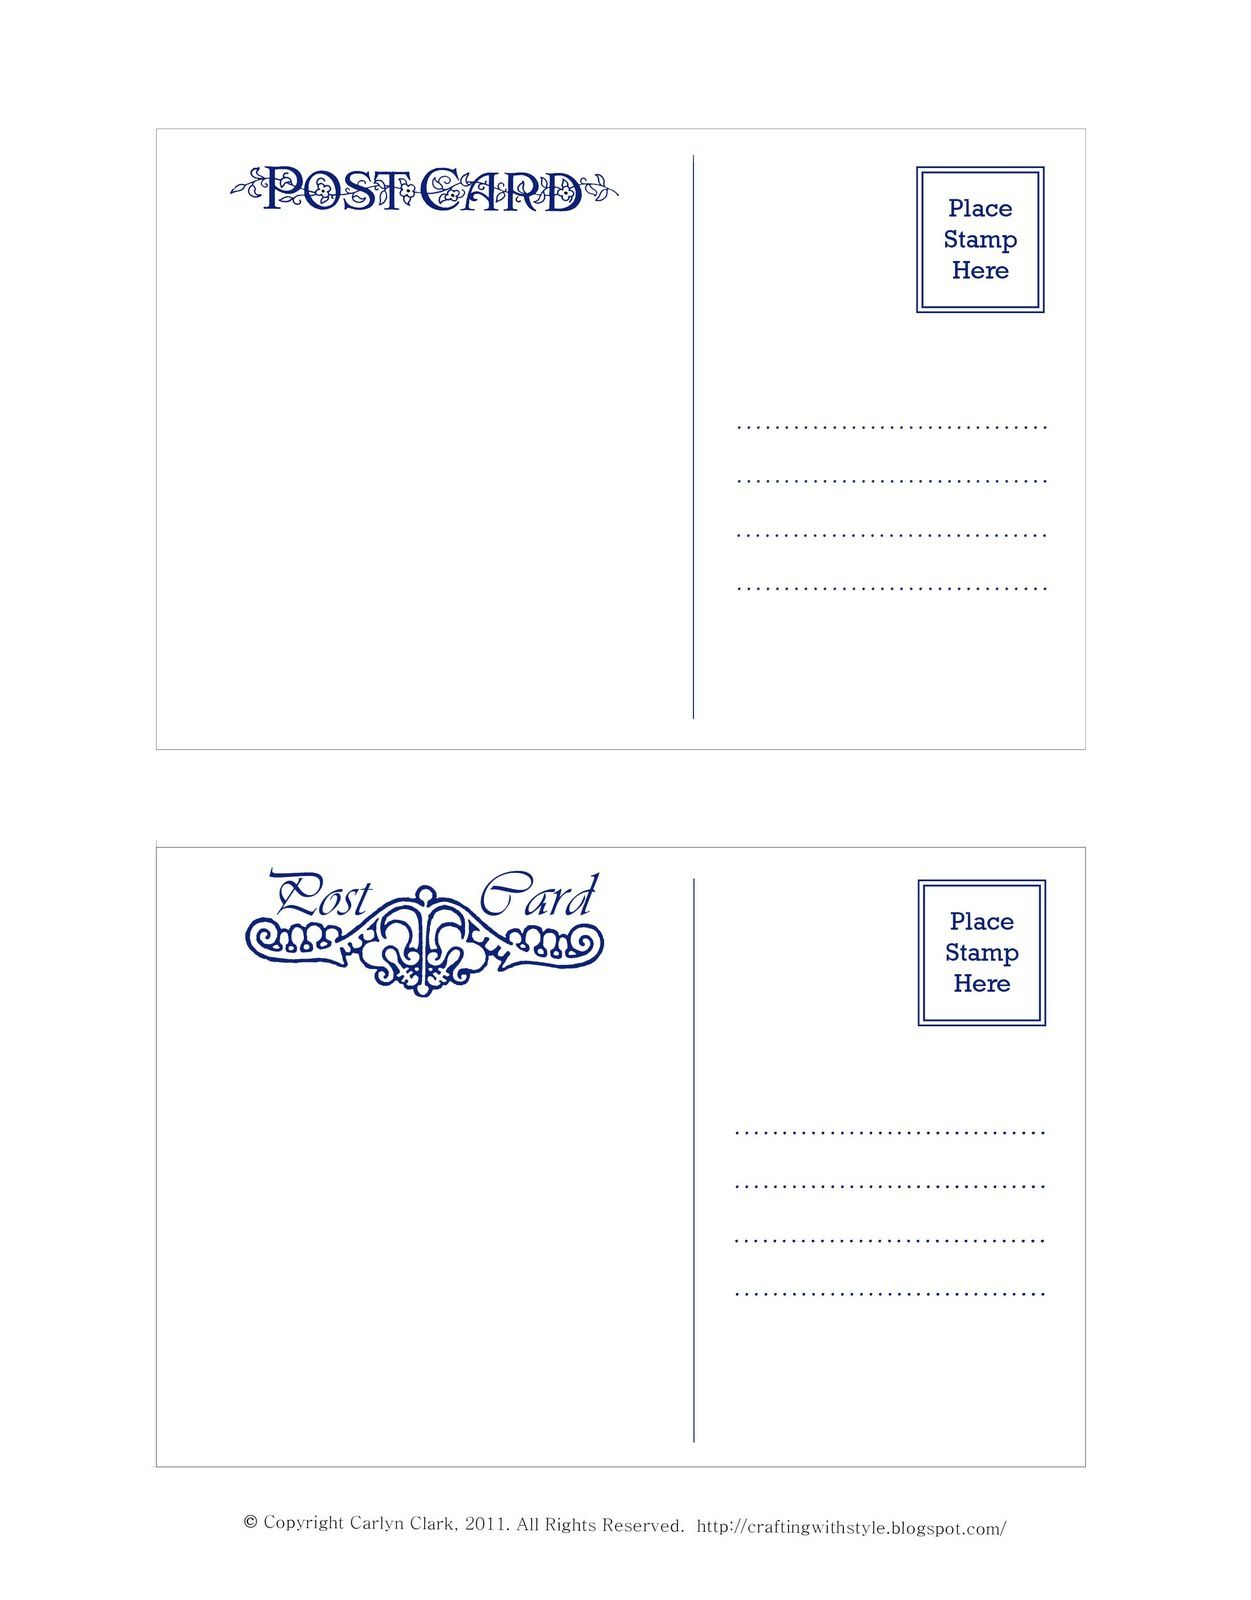 Crafting With Style: Free Postcard Templates | Postcards Inside Free Blank Postcard Template For Word